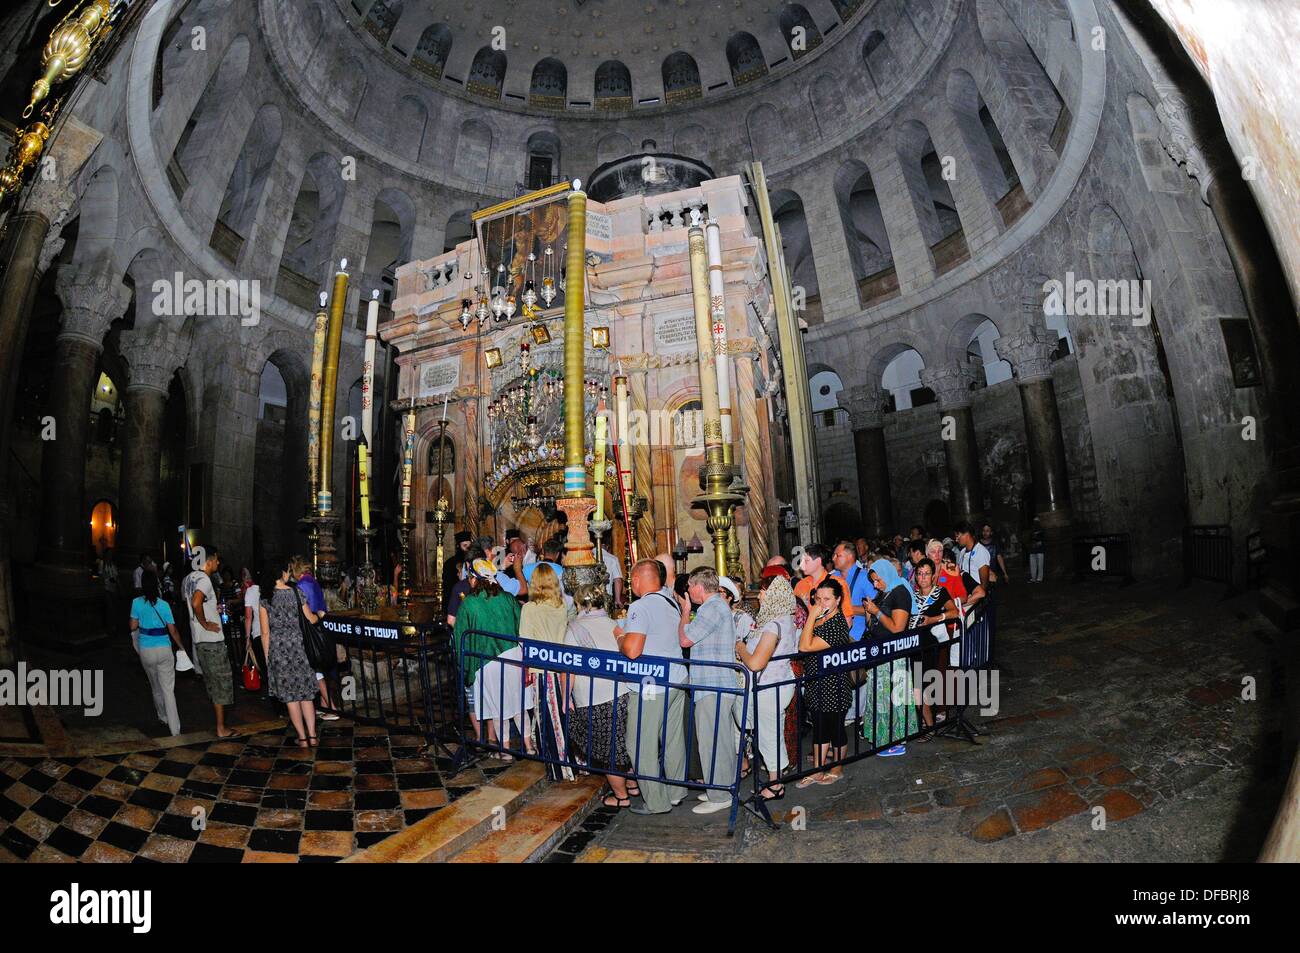 The most important site of the Church of the Holy Sepulchre is the Aedicule (Holy Grave, Grave Chapel), the supposed location of Jesus' grave and the 14th statio of the Via Dolorosa, that is visited by thousands of pilgrims and tourists daily, in Jerusalem, Israel, 12 September 2013. The Via Dolorosa (Way of Suffering) is a street in the old town of Jerusalem named after the path Jesus of Nazareth walked to his crucification. Jesus carried the cross, on which he later died via that road from the Antonia Fortress, then seat of Pilate, to Golgotha, the place where his grave is supposedly located Stock Photo